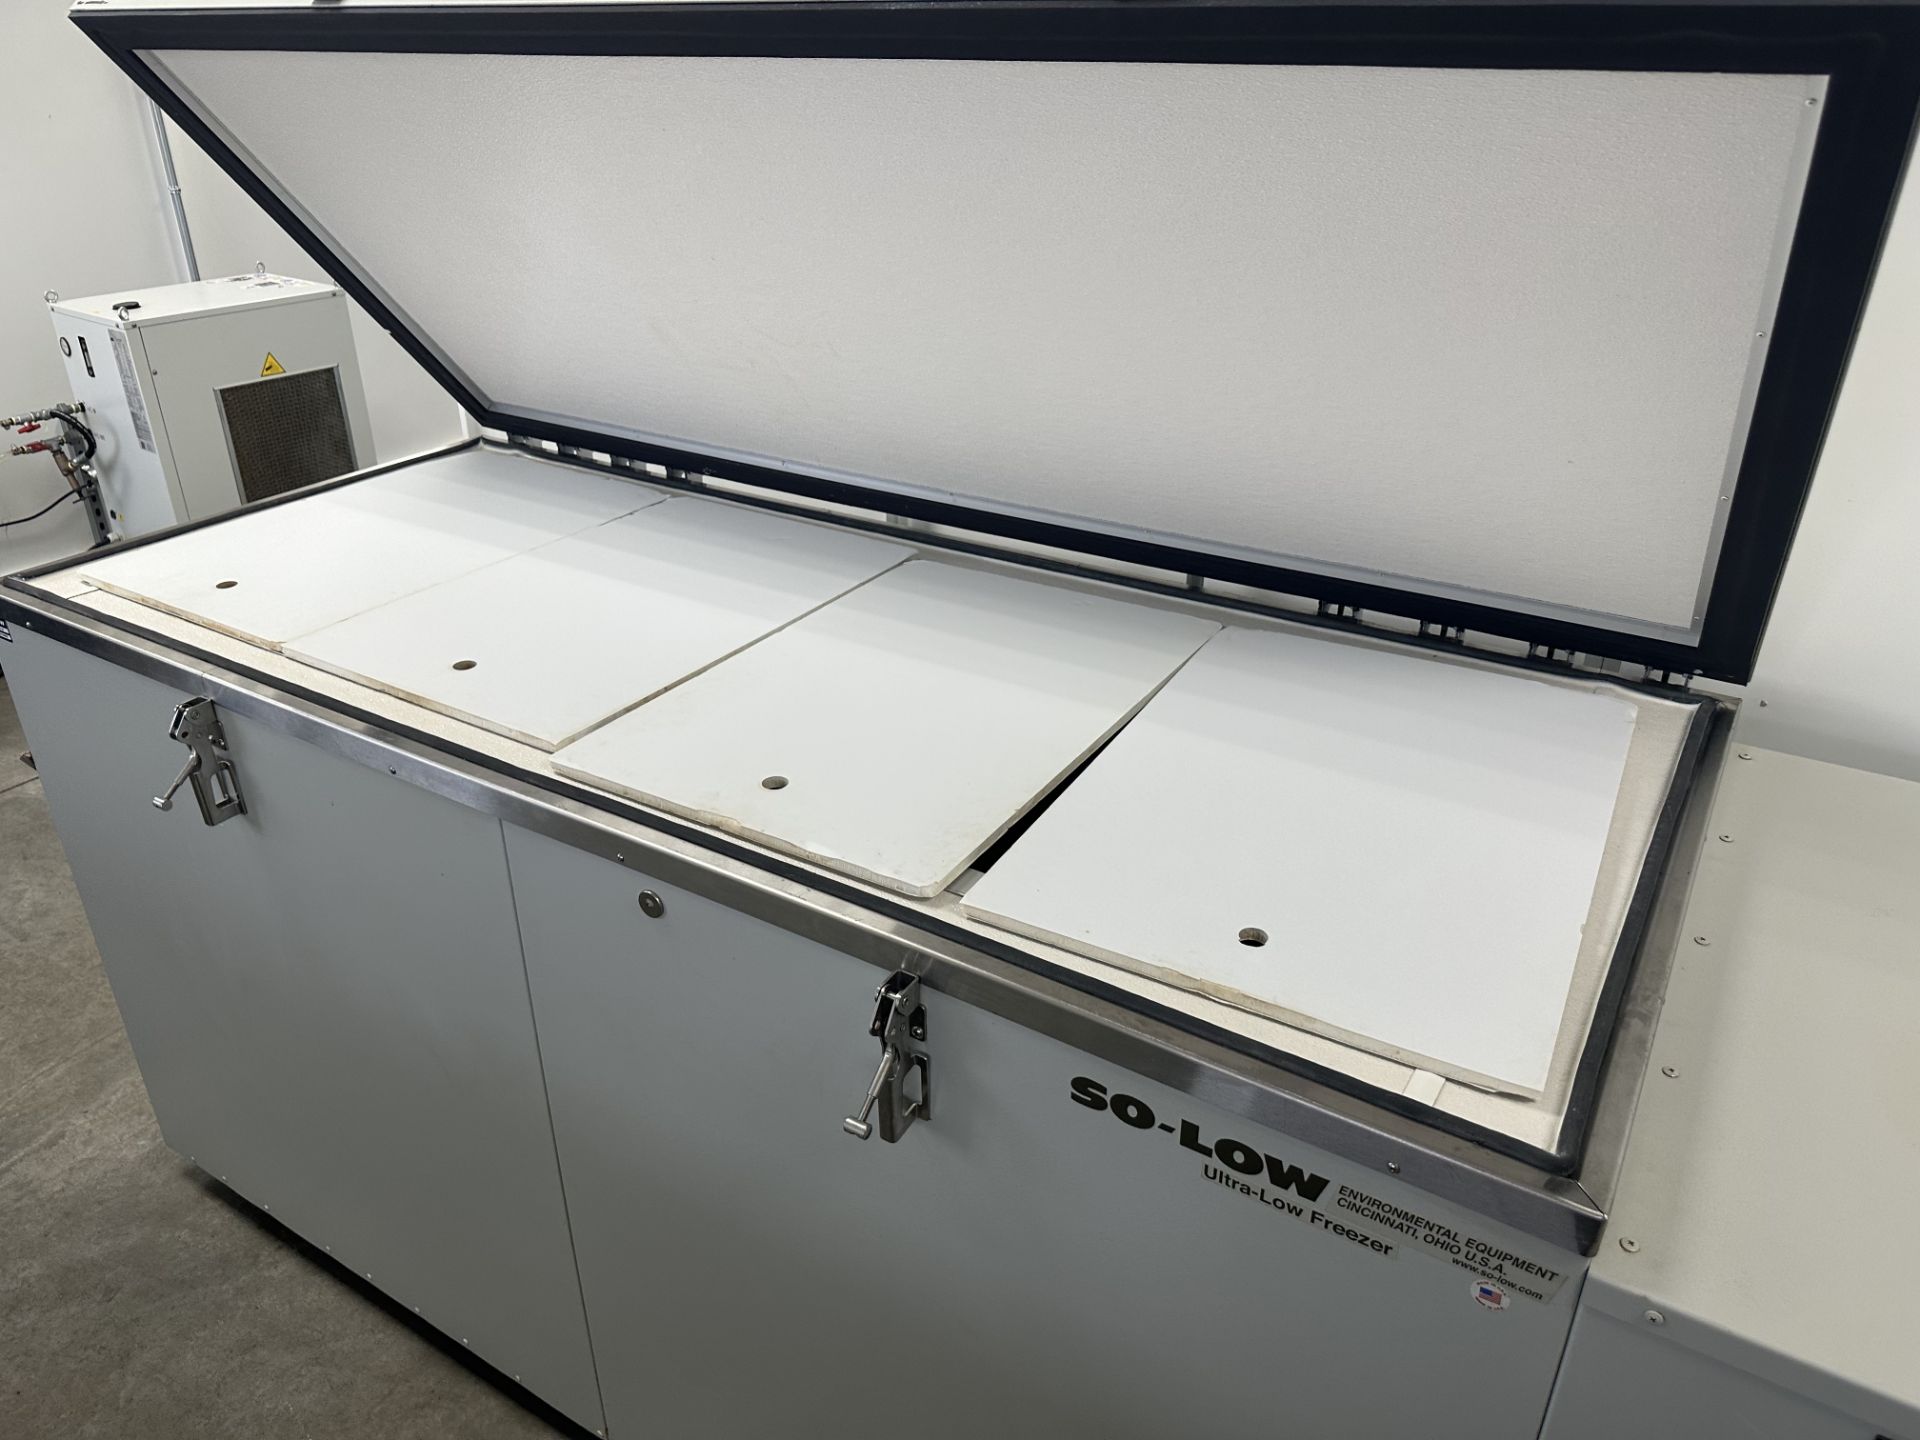 Lot of (3) Used So Low 27 CuFt Explosion Proof Chest-Style Freezer. Model C40-27 - Image 8 of 19